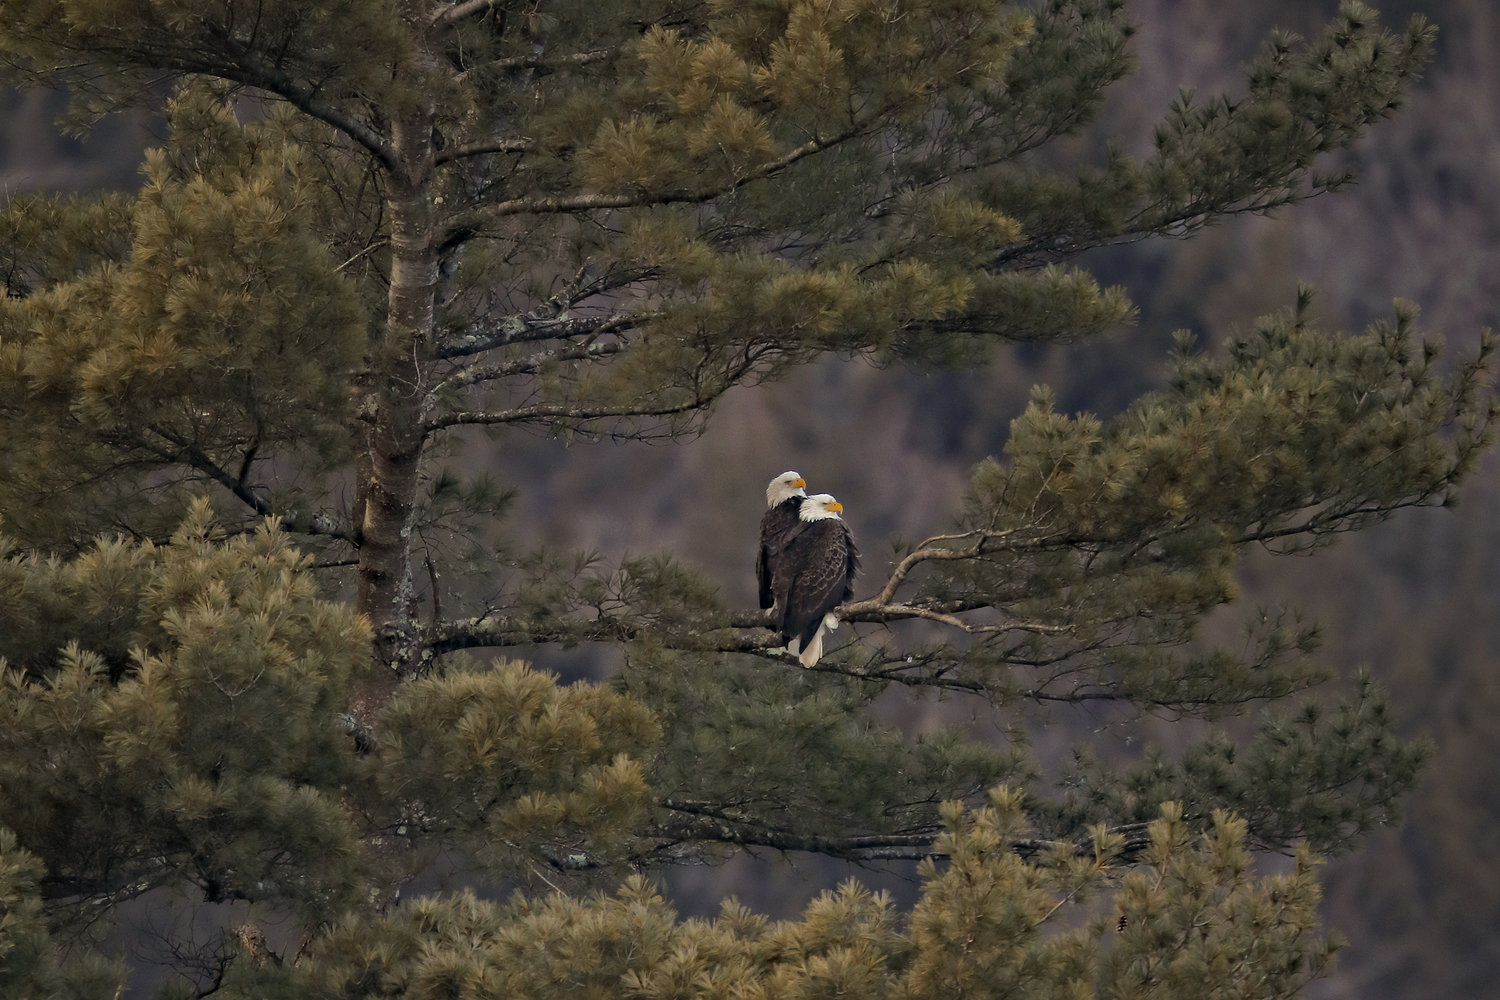 Join the Conservancy on a guided eagle-viewing bus tour, scheduled on select weekends in January and February.